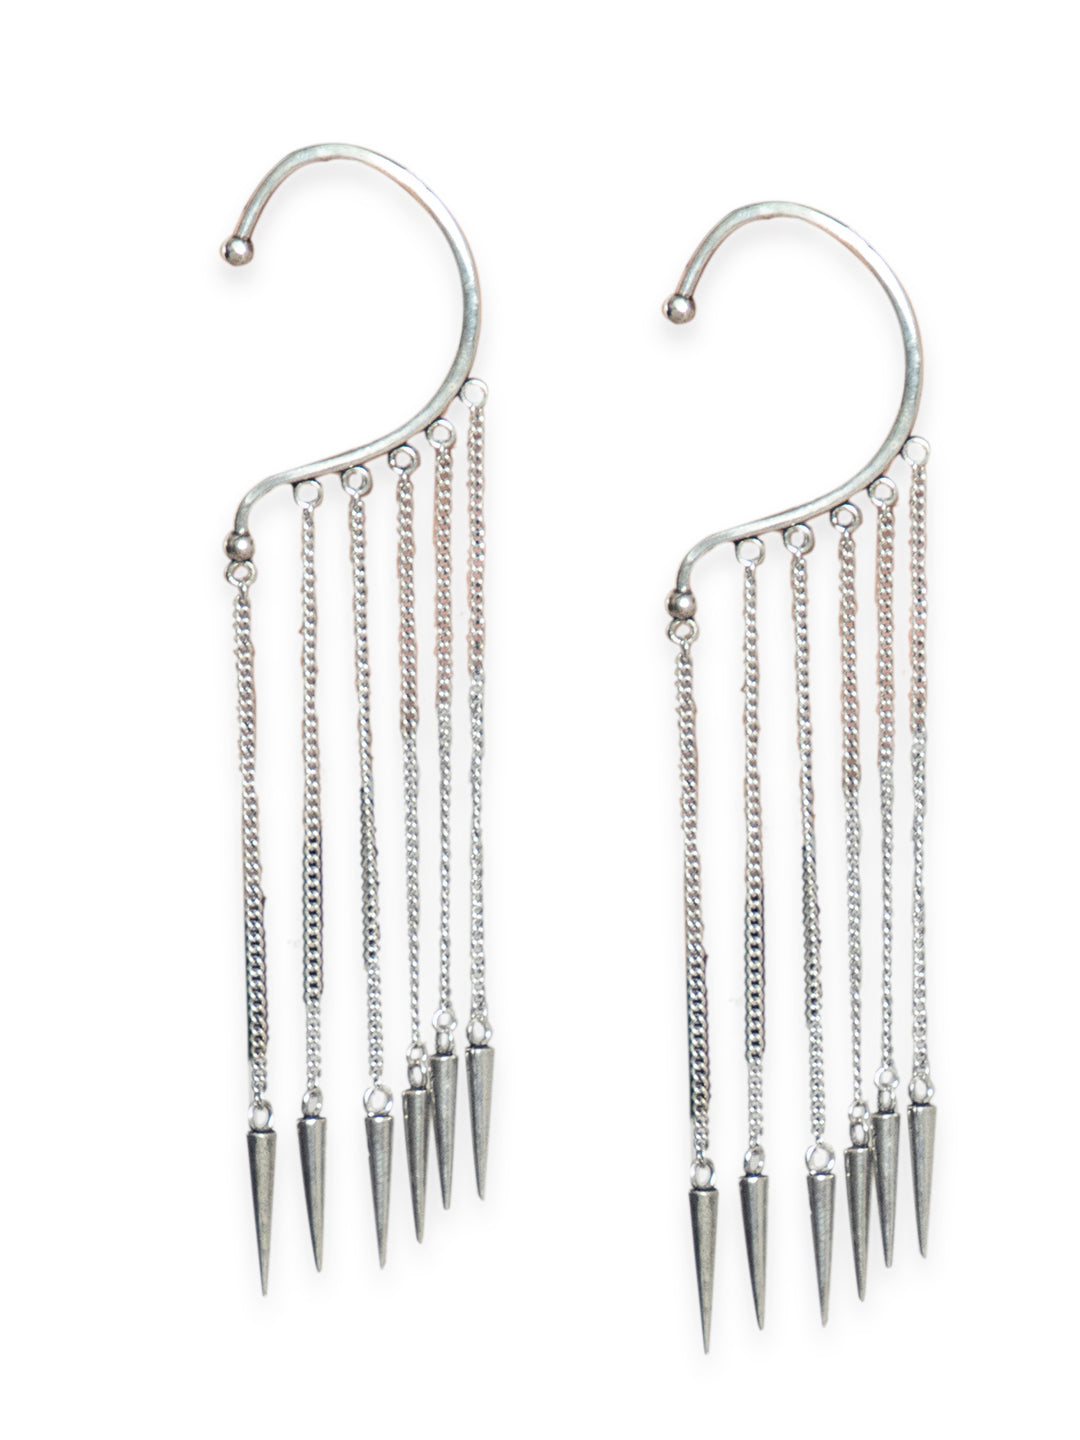 Studio One Love Party Gold and Silver -Toned Contemporary Ear Cuff Earrings, Drop and Dangle Ear Cuff Earrings